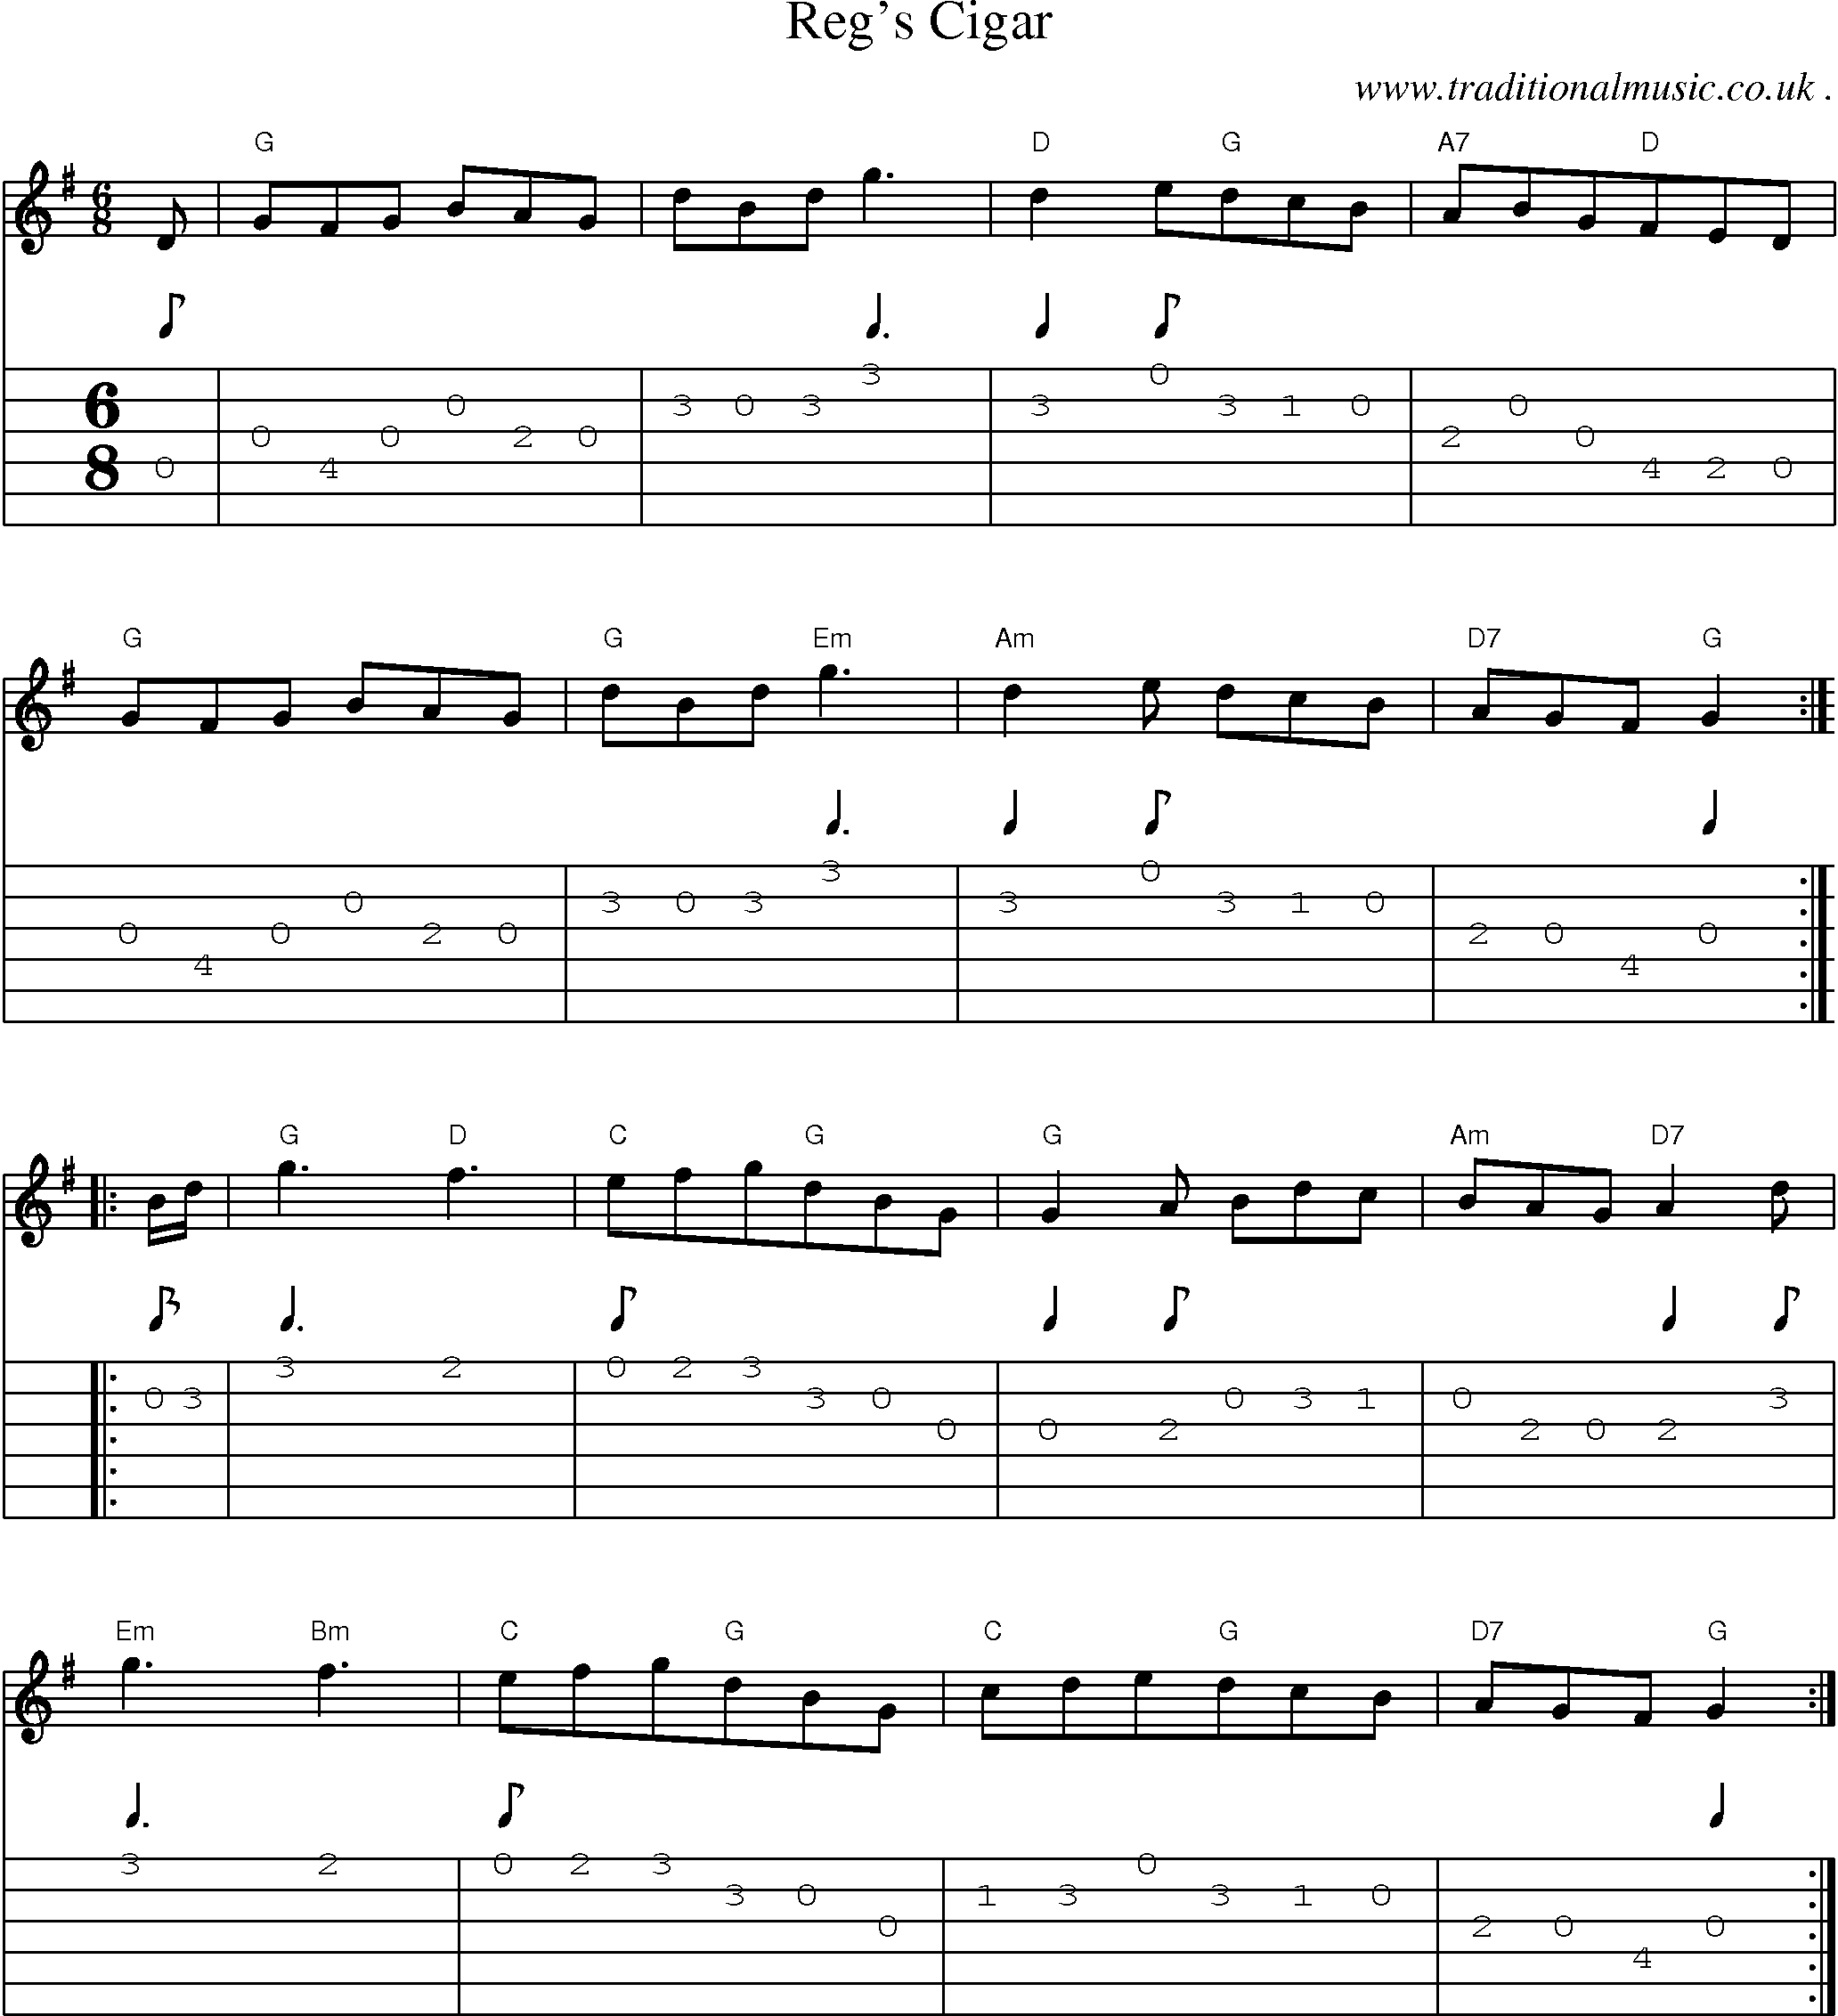 Sheet-Music and Guitar Tabs for Regs Cigar